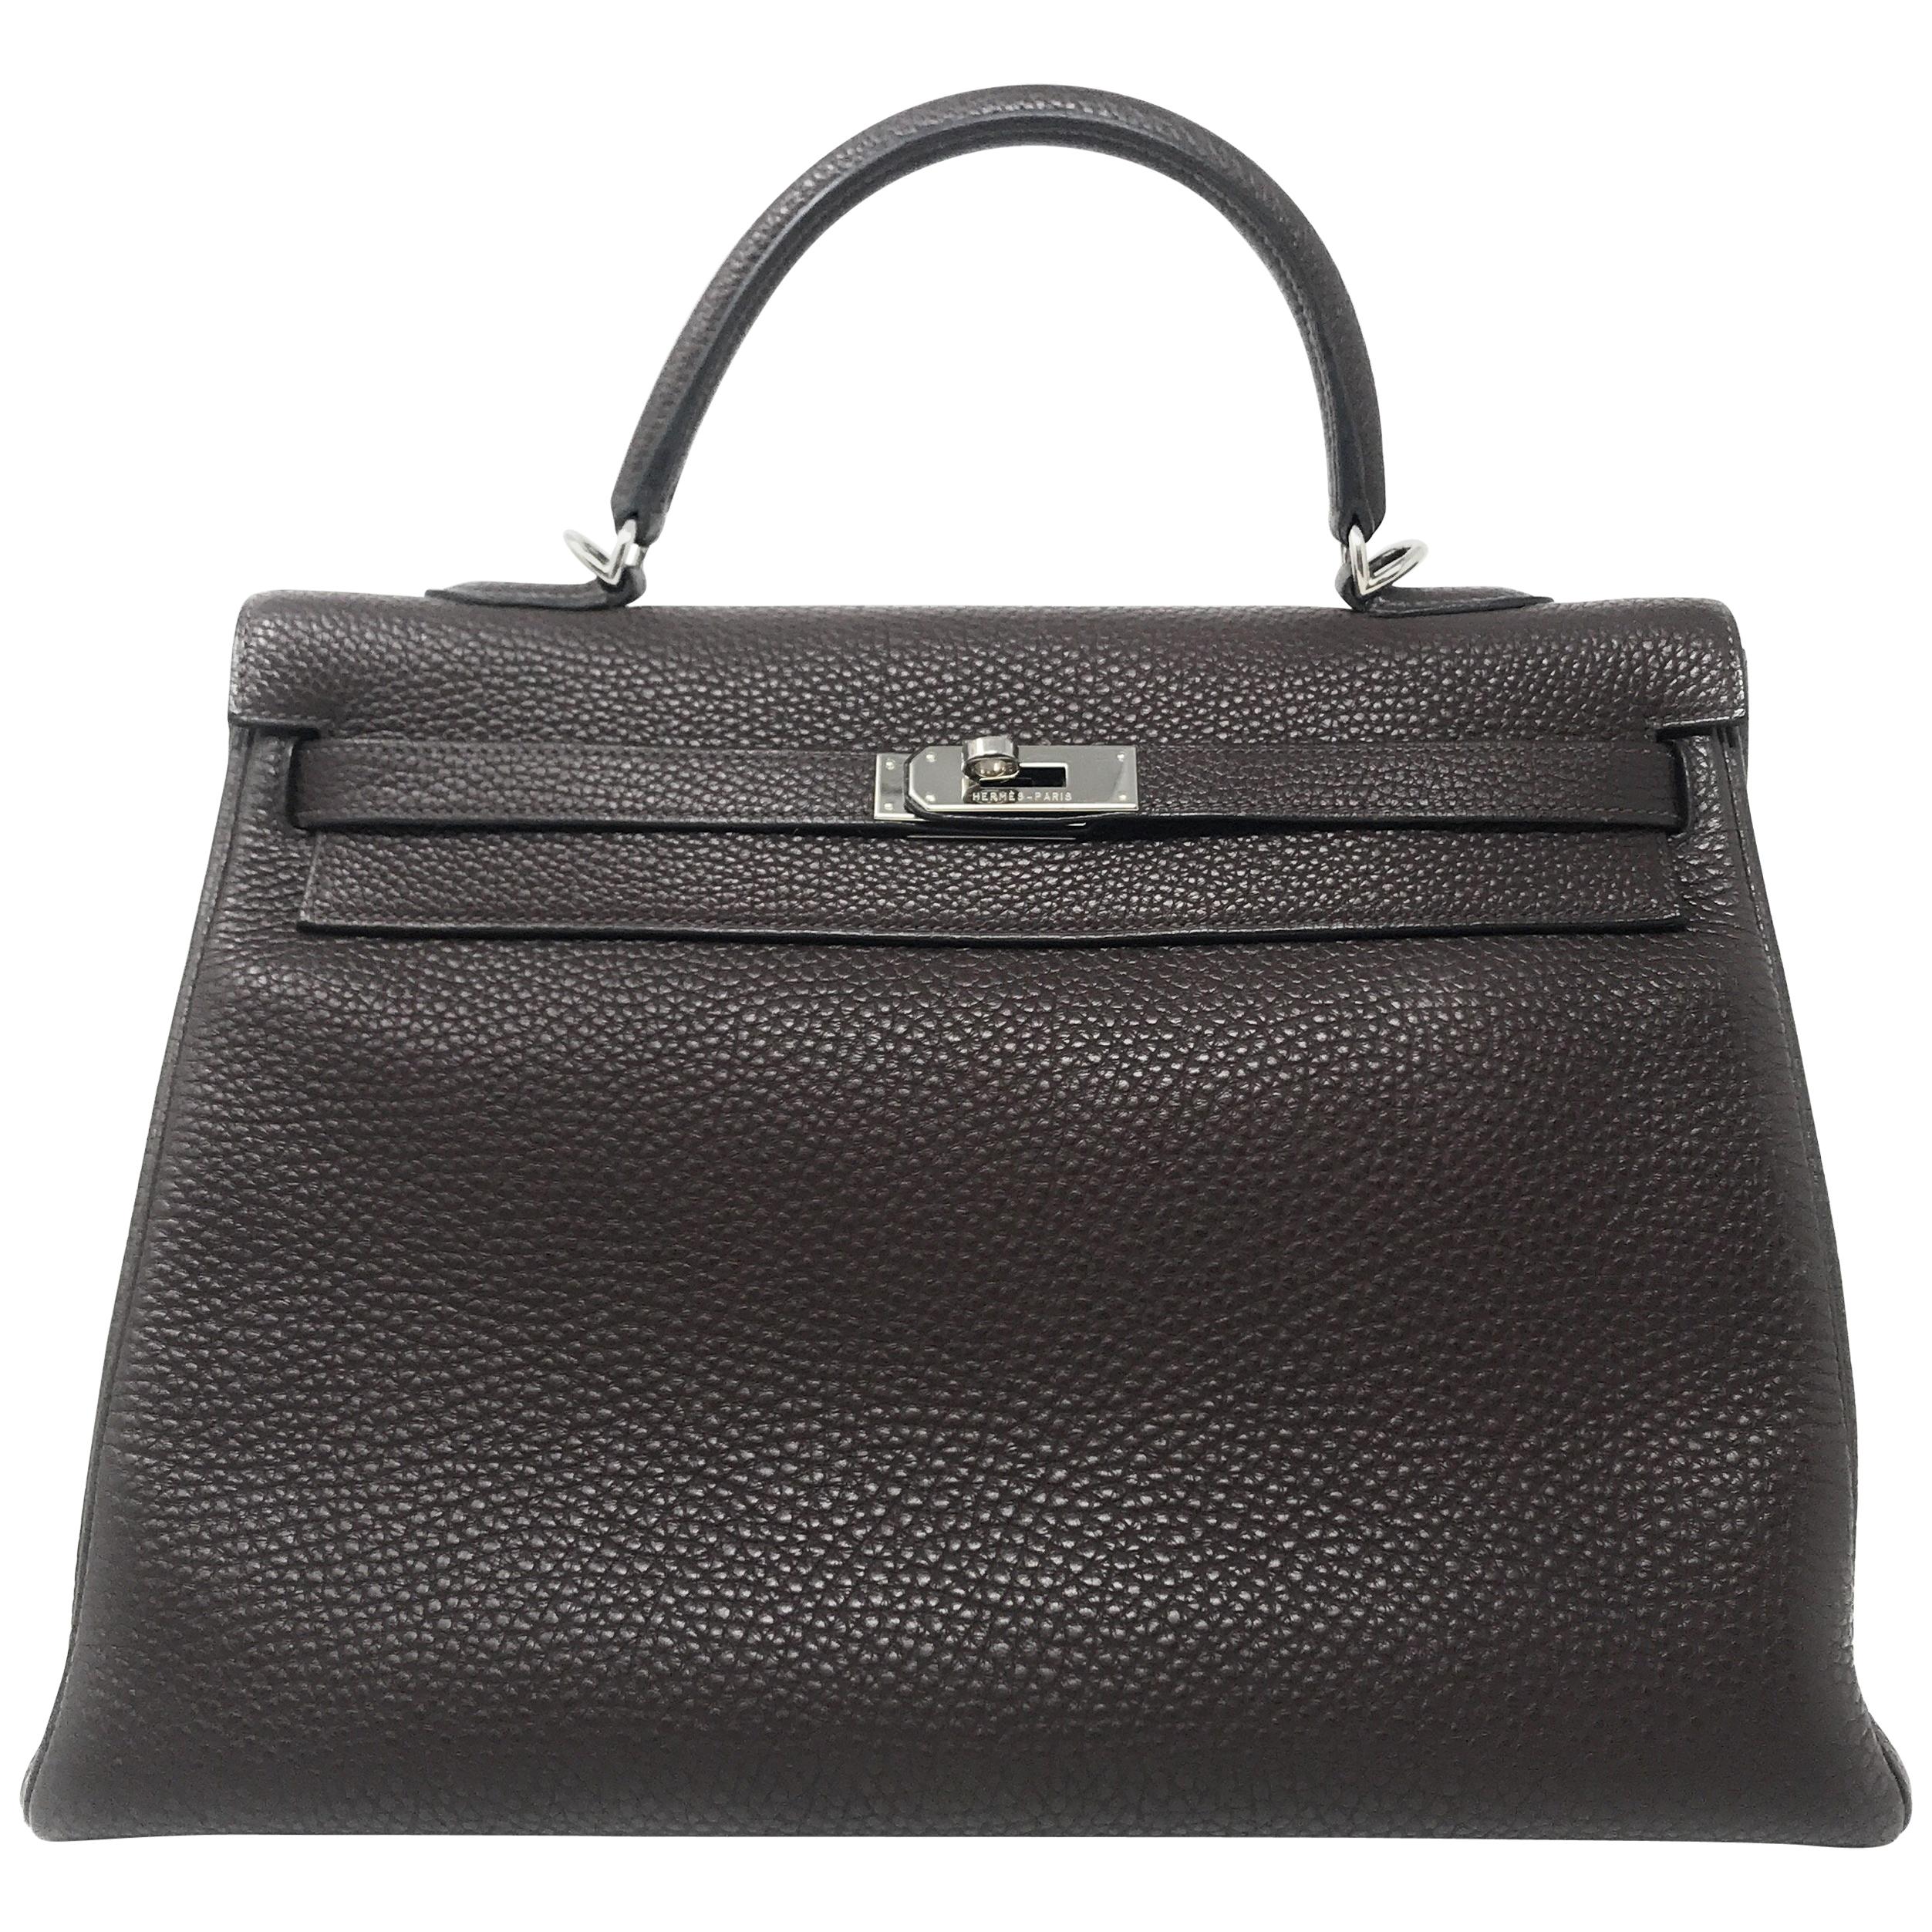 Hermes Kelly 35cm Chocolate Brown For Sale